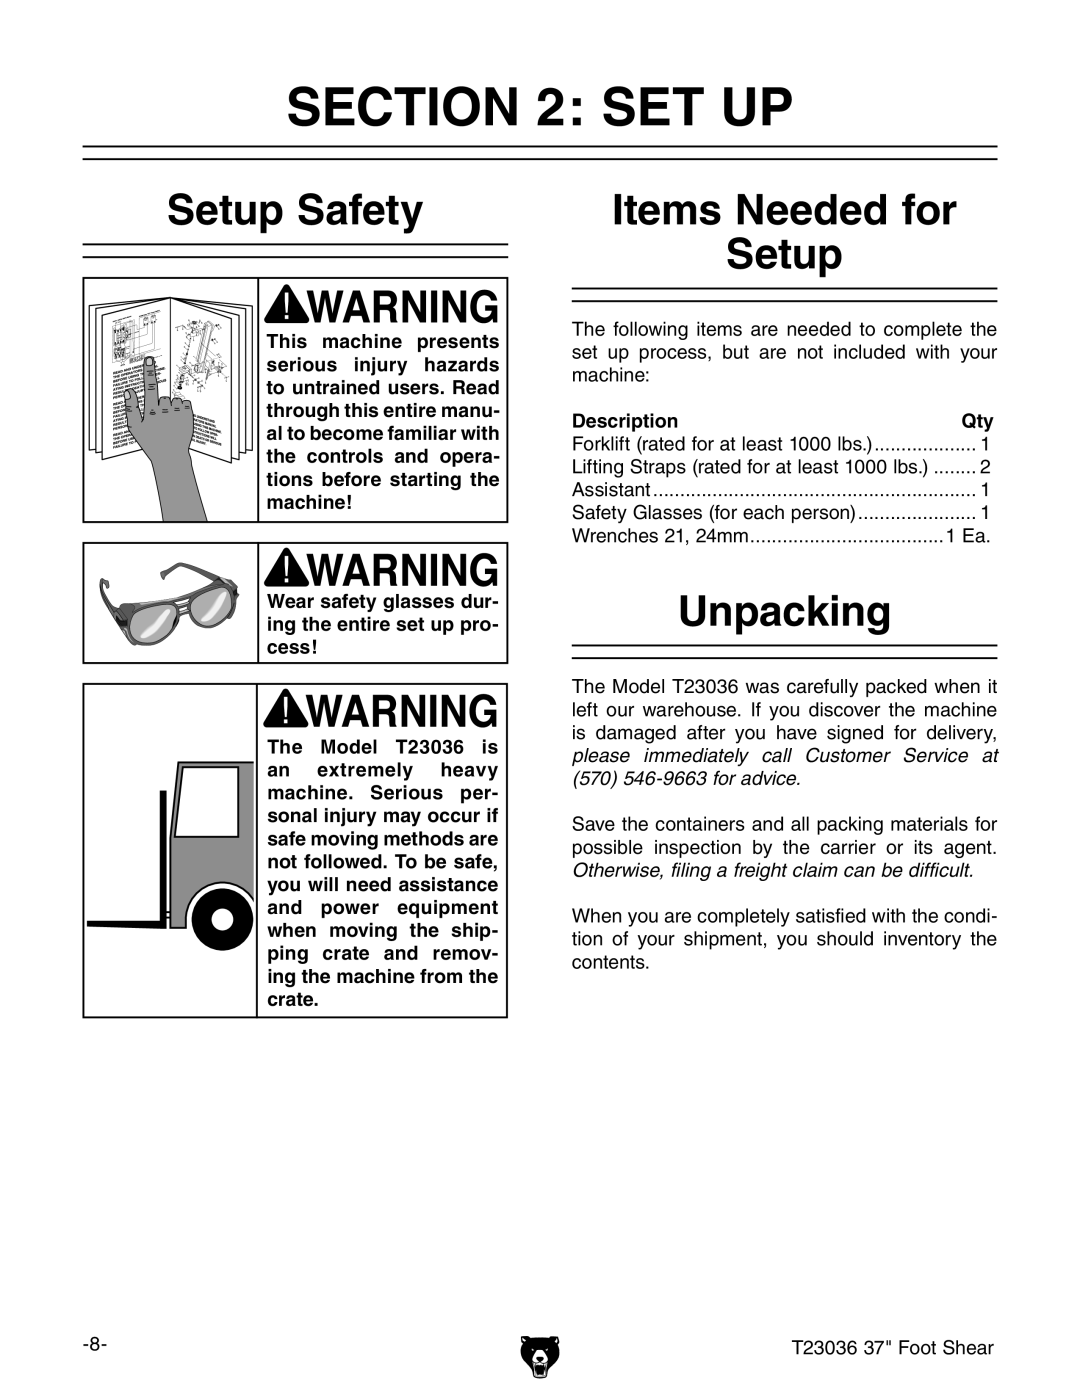 Grizzly T23036 owner manual Set Up, Setup Safety, Items Needed for, Unpacking 